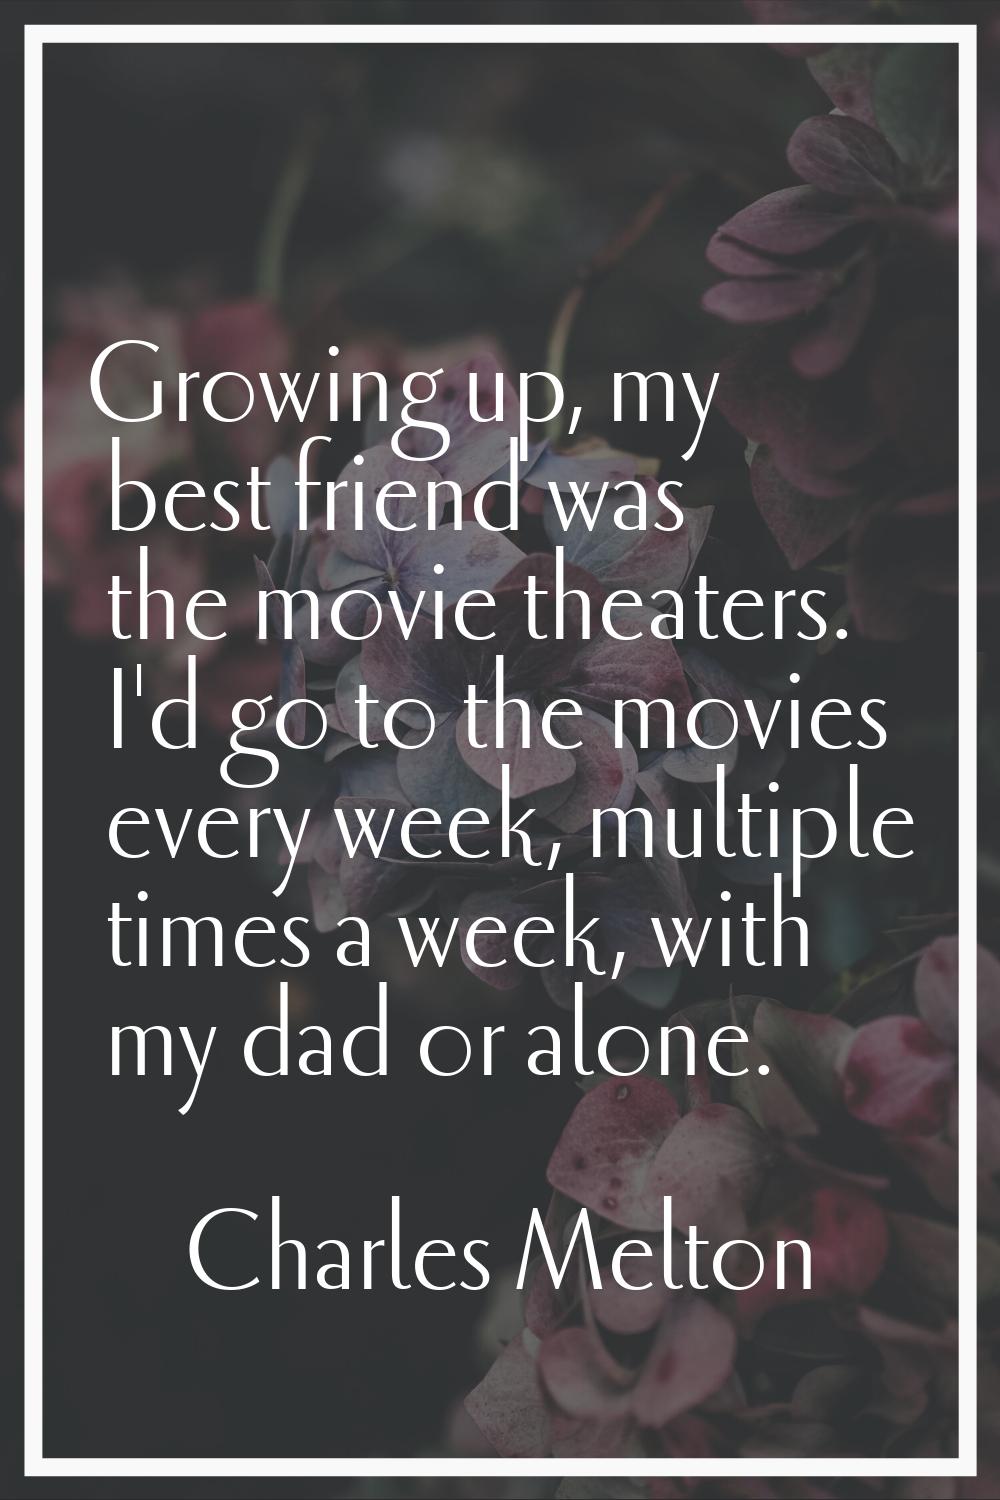 Growing up, my best friend was the movie theaters. I'd go to the movies every week, multiple times 